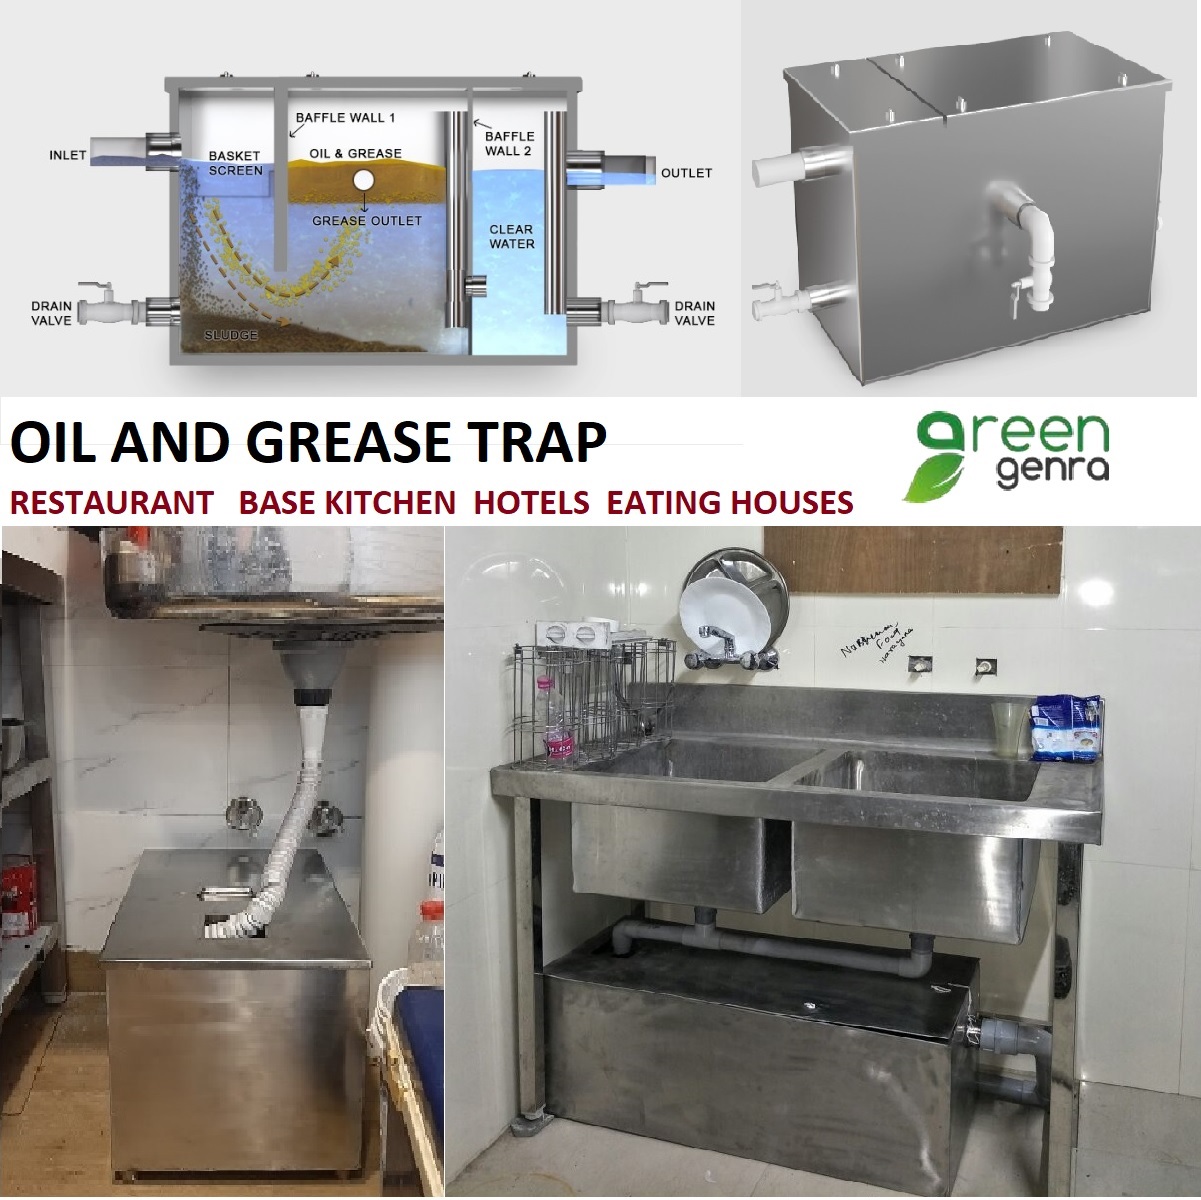 Oil & Grease Trap Suppliers | Grease Trap Price - Green Genra